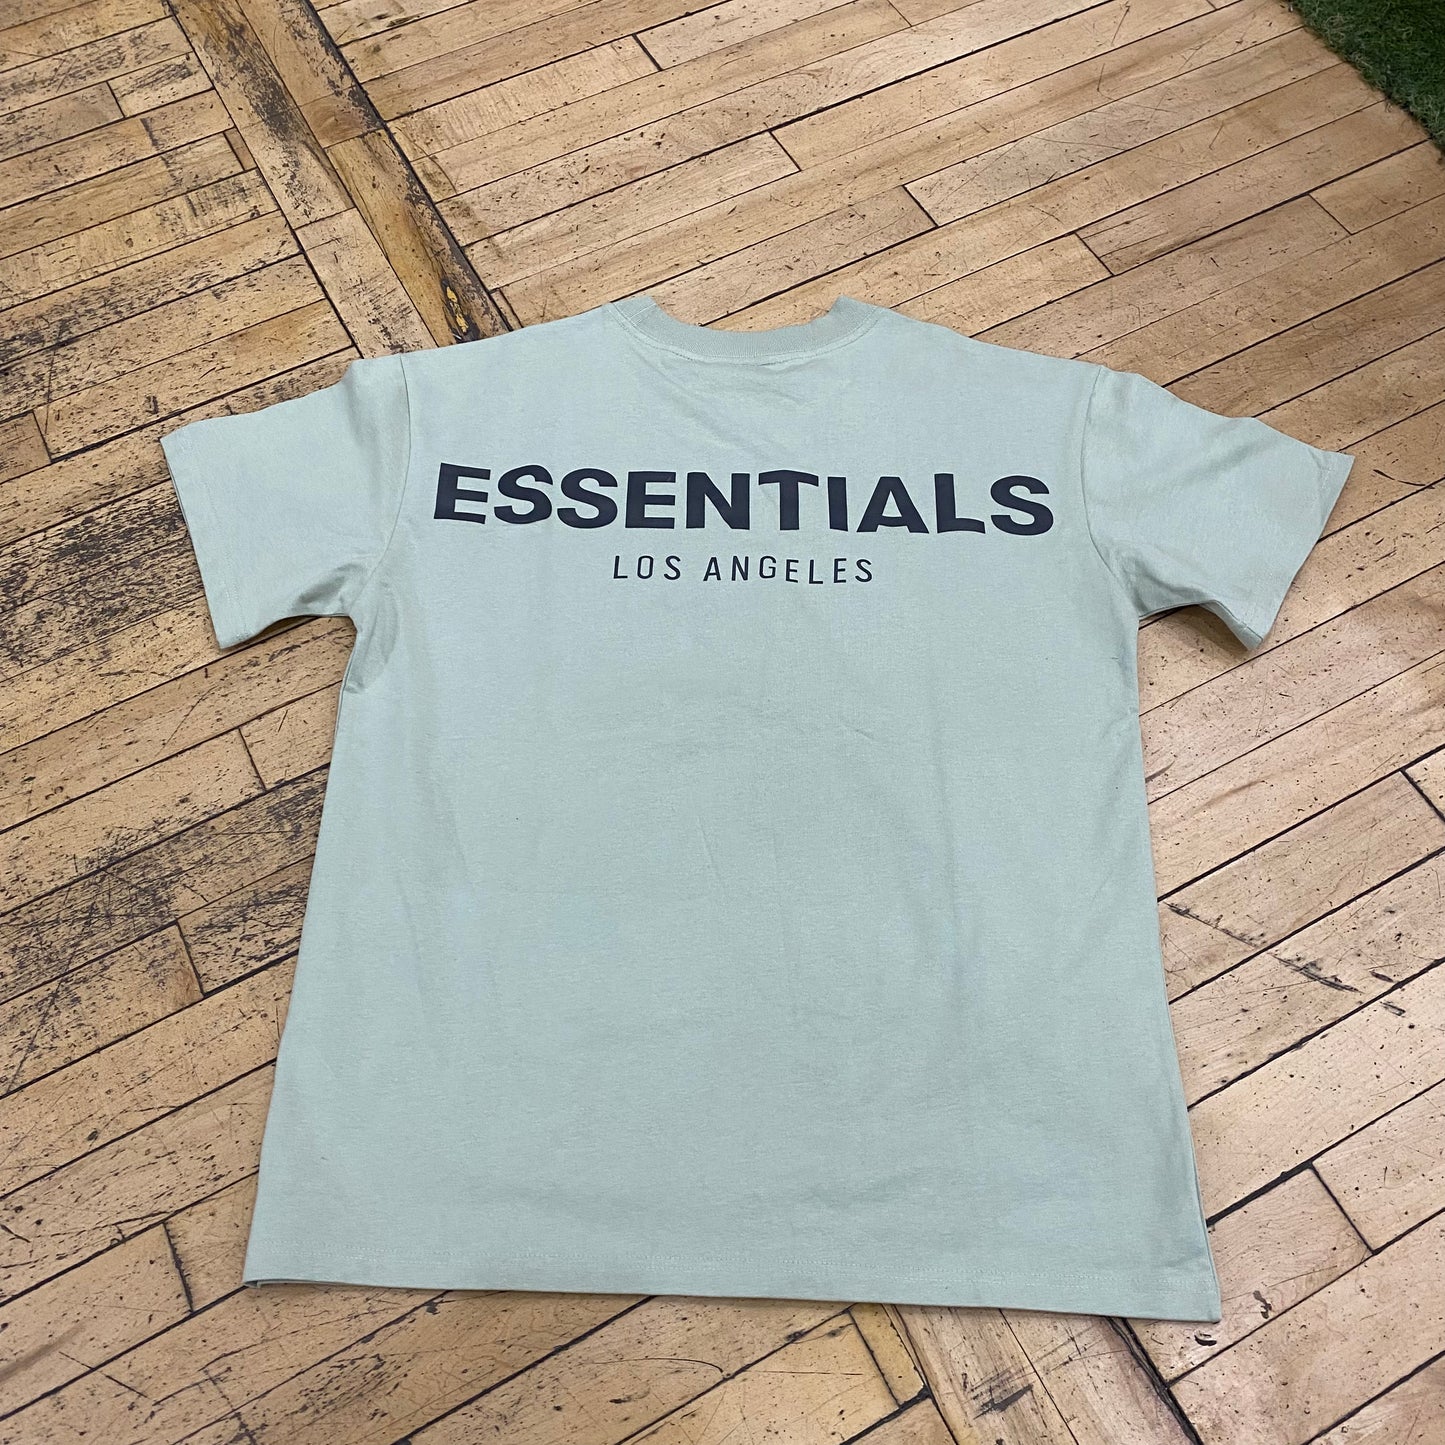 Essentials Reflective Shirt Size Small (MKE) TRUSTED CLUB